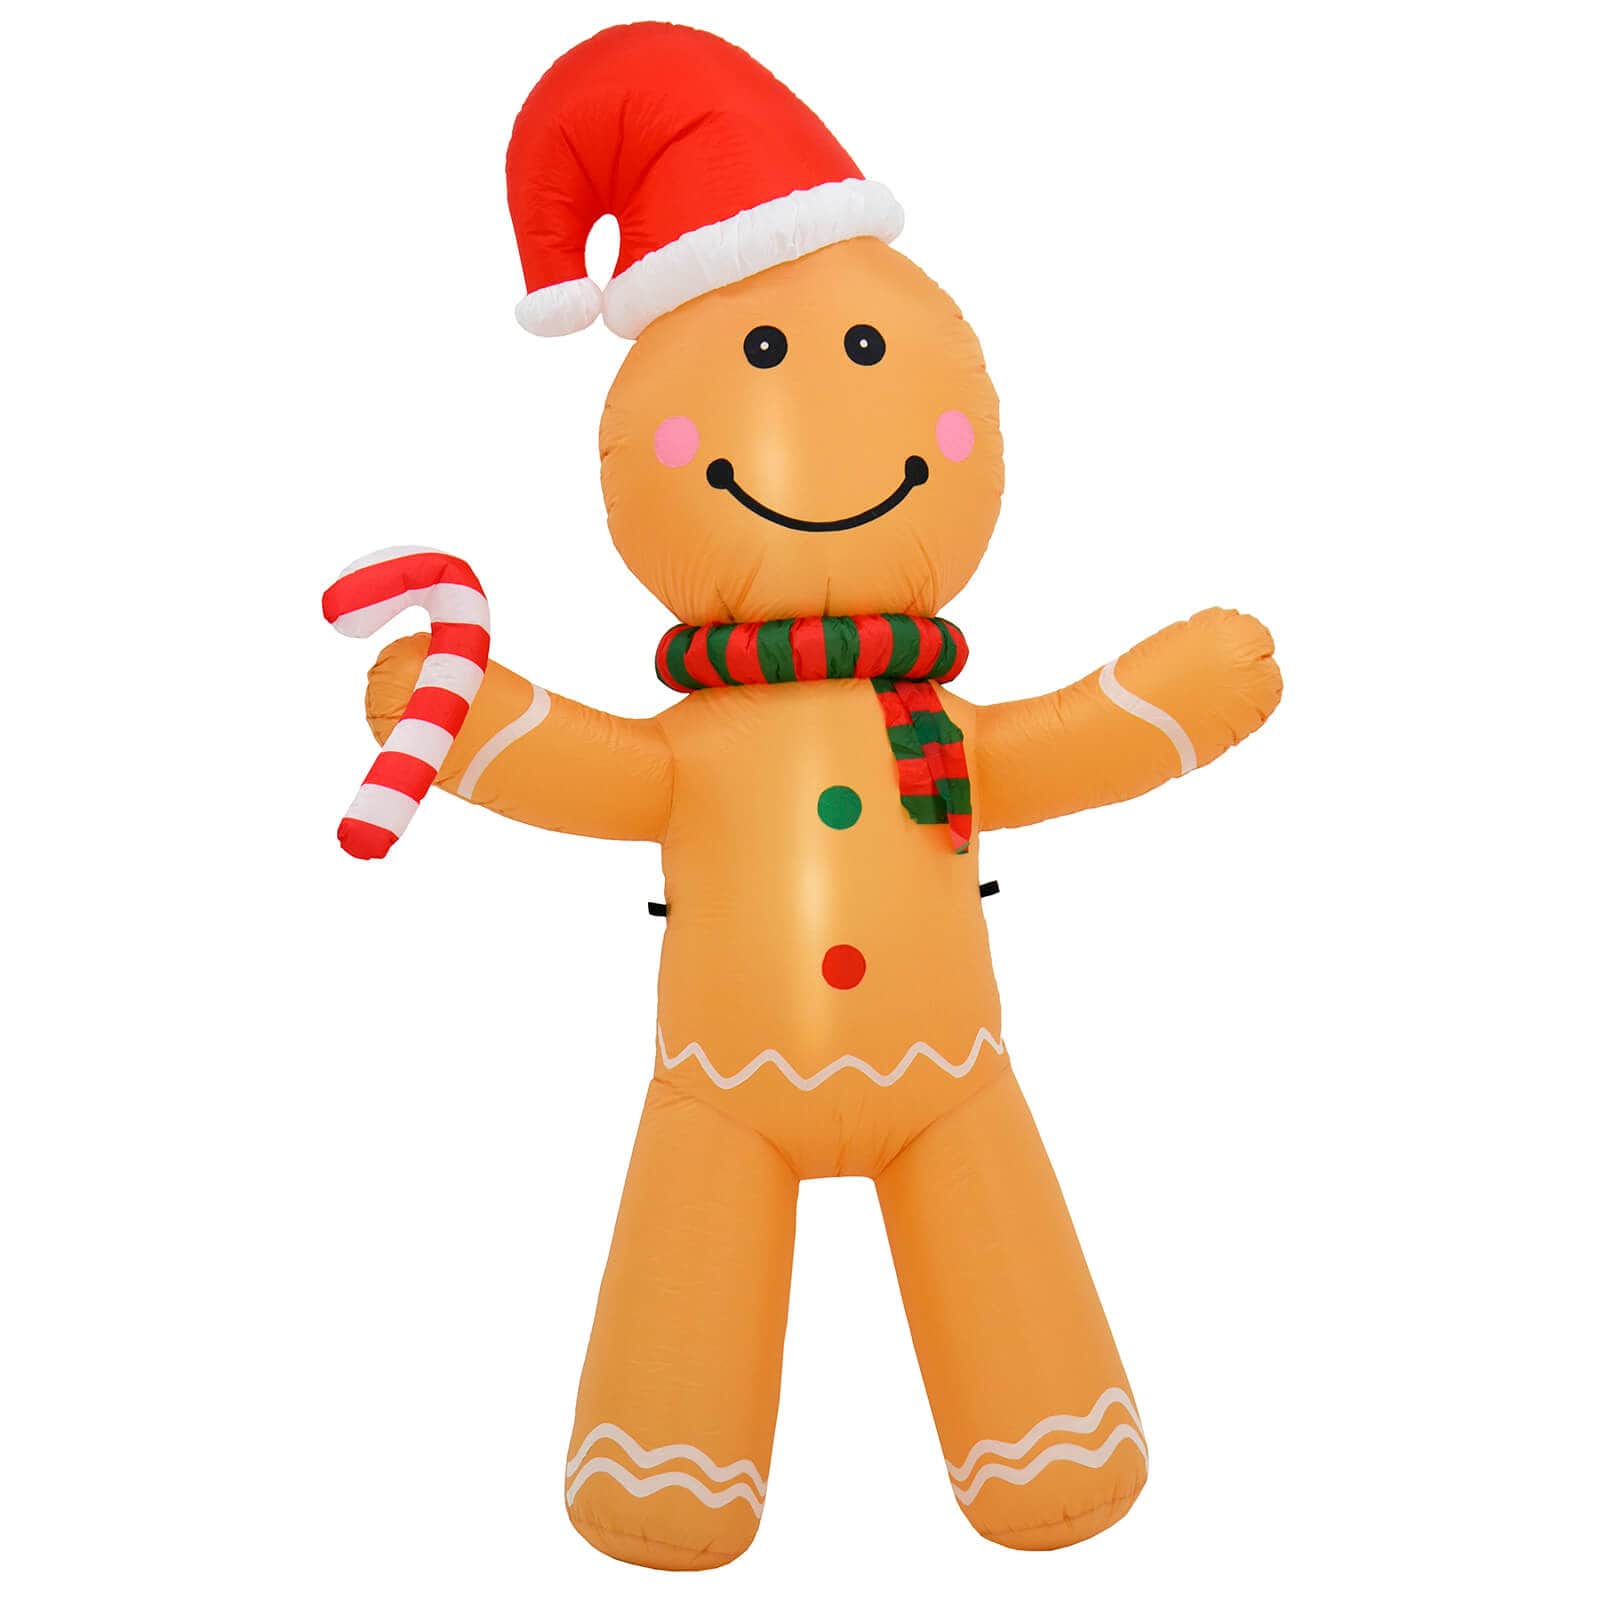 Large Christmas inflatable gingerbread figure with Santa hat, red and green scarf, and holding a striped candy cane